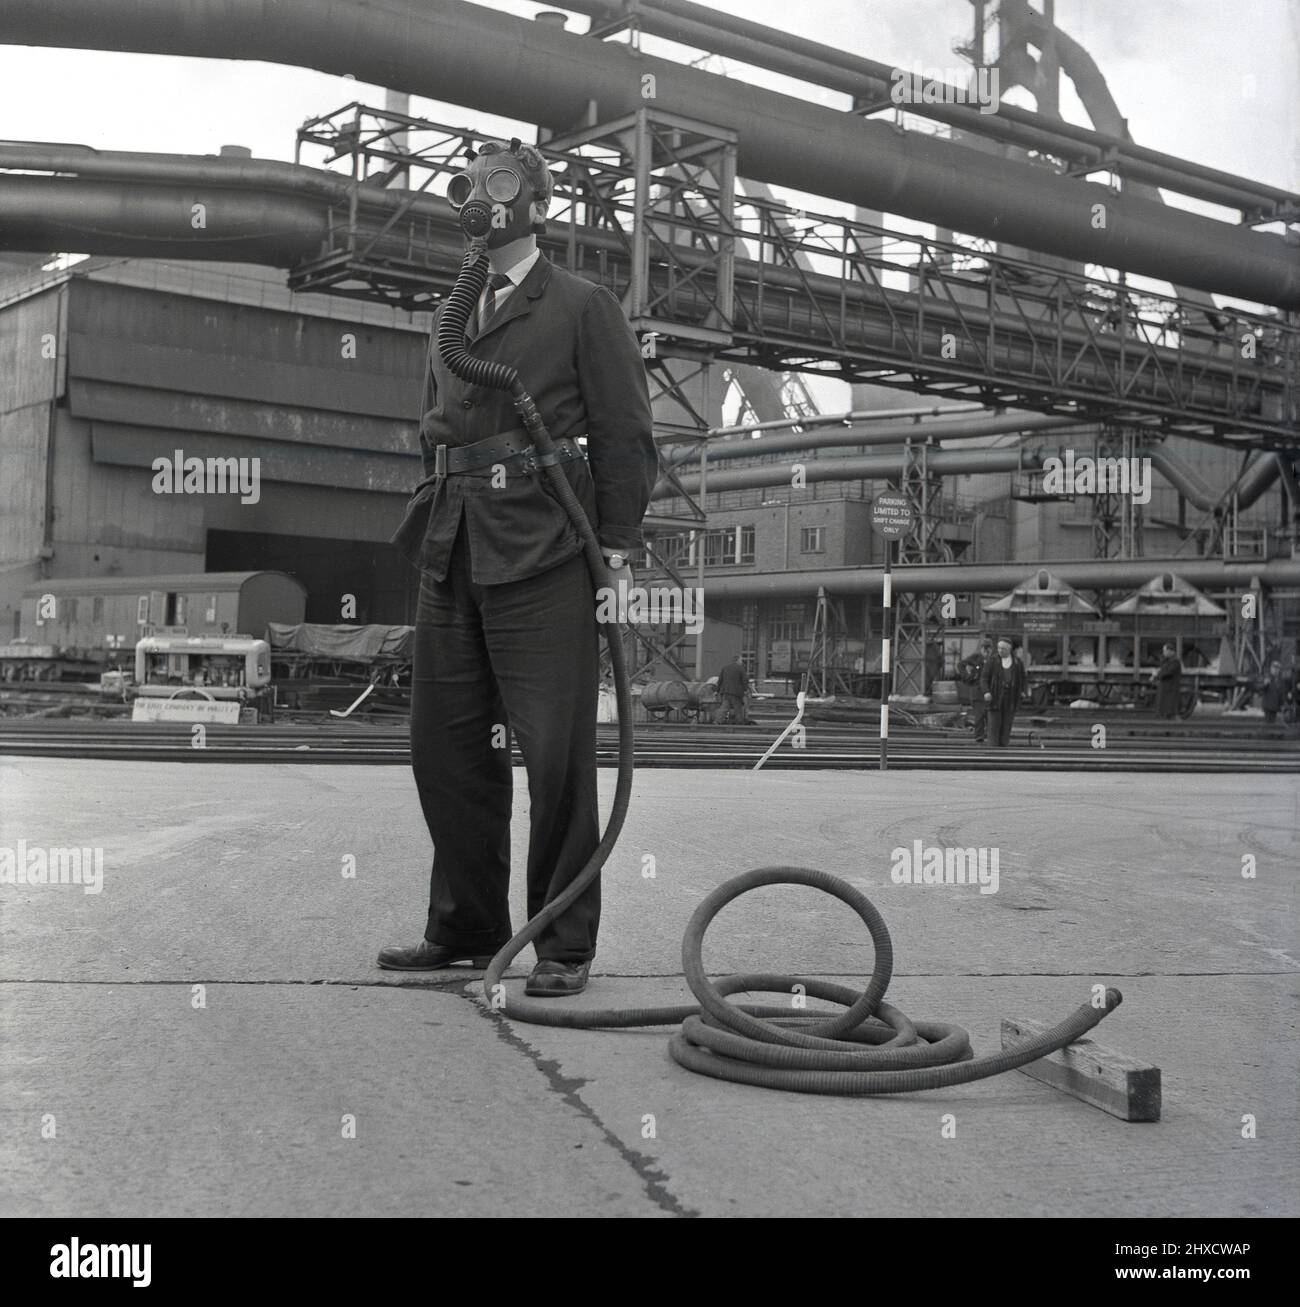 1950s, historical, at the giant Abbey Works steel complex, a worker on the tarmac outside the plant, wearing a gas mask attached to a long pipe, Port Talbot, Wales, UK. He is demonstrating the health & safety equipment available on the site from airborne pollutants and toxic gases. Stock Photo